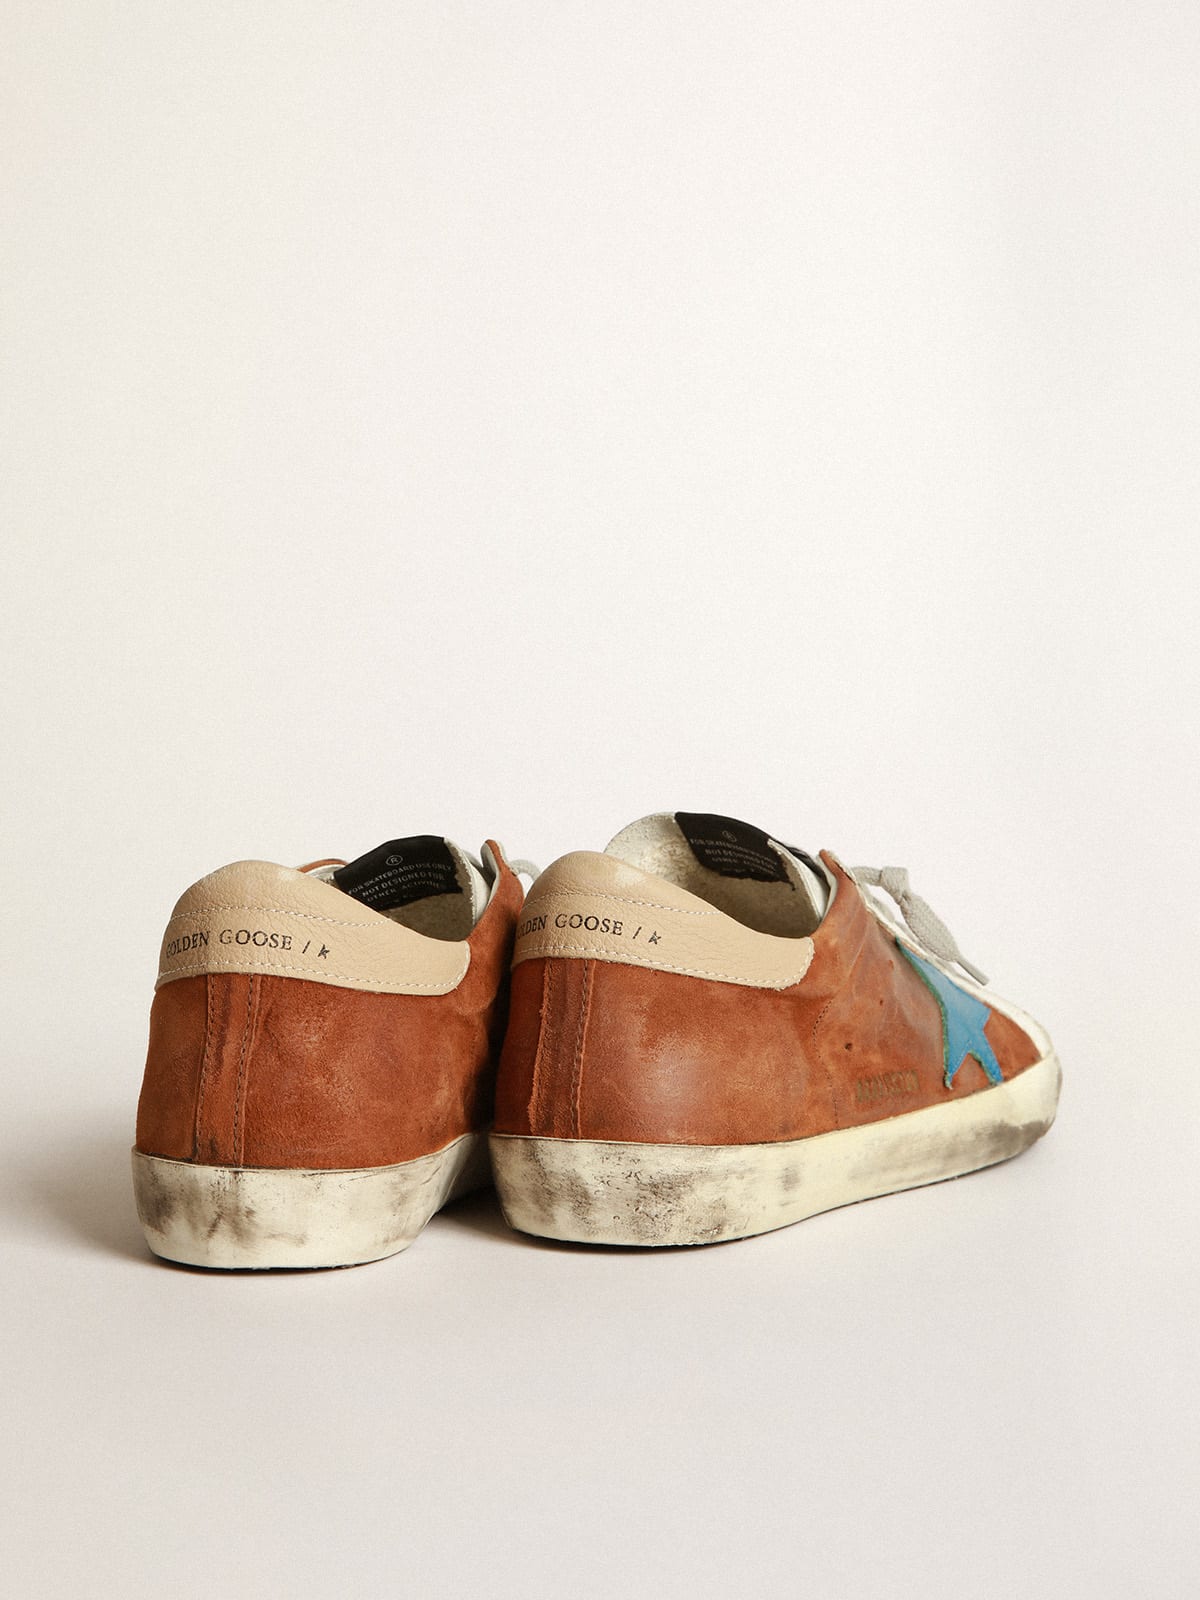 Golden Goose - Super-Star sneakers in brown suede with a navy blue star in 